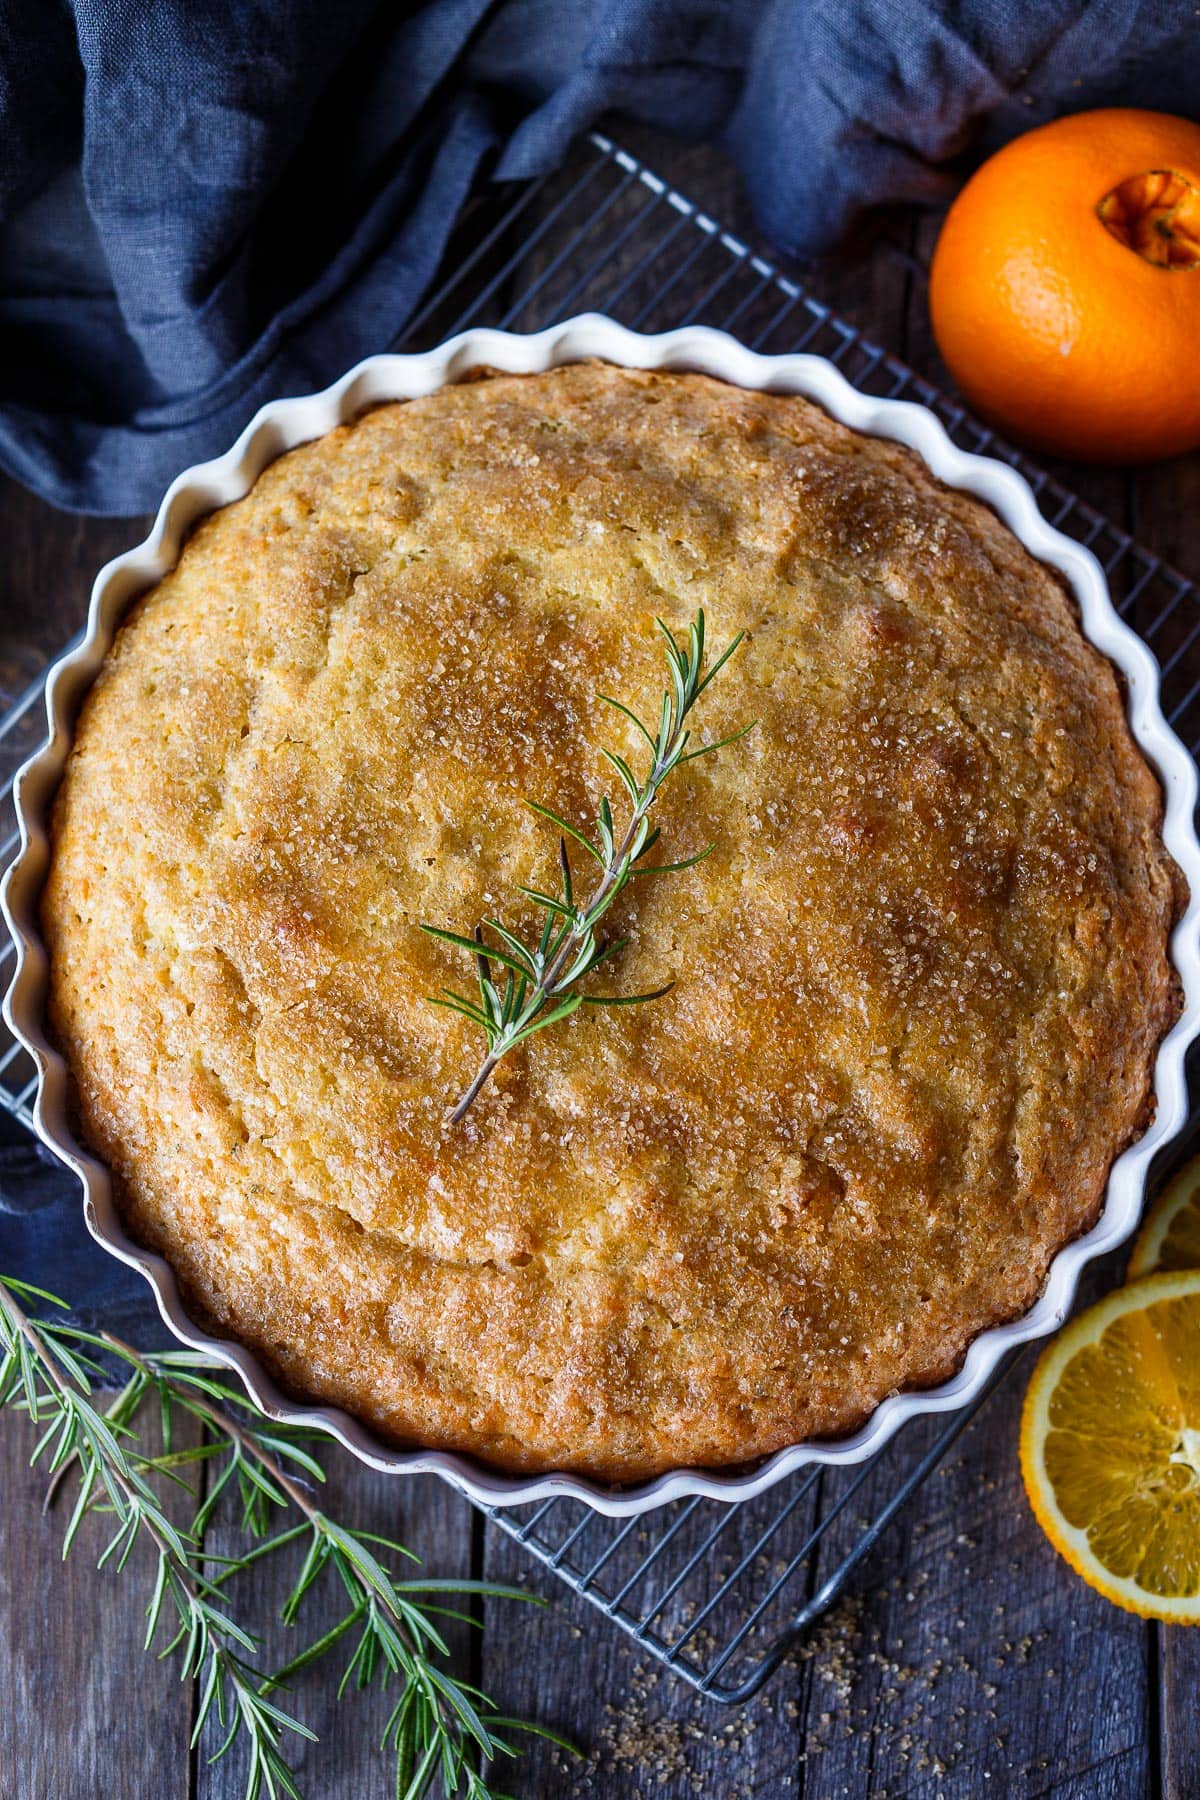 Enhanced with fresh rosemary and orange zest this Olive Oil Cake is easy to make, has a lovely  rustic texture and stays moist for days. Lightly sweetened, it is perfect for dessert, brunch or with afternoon tea.